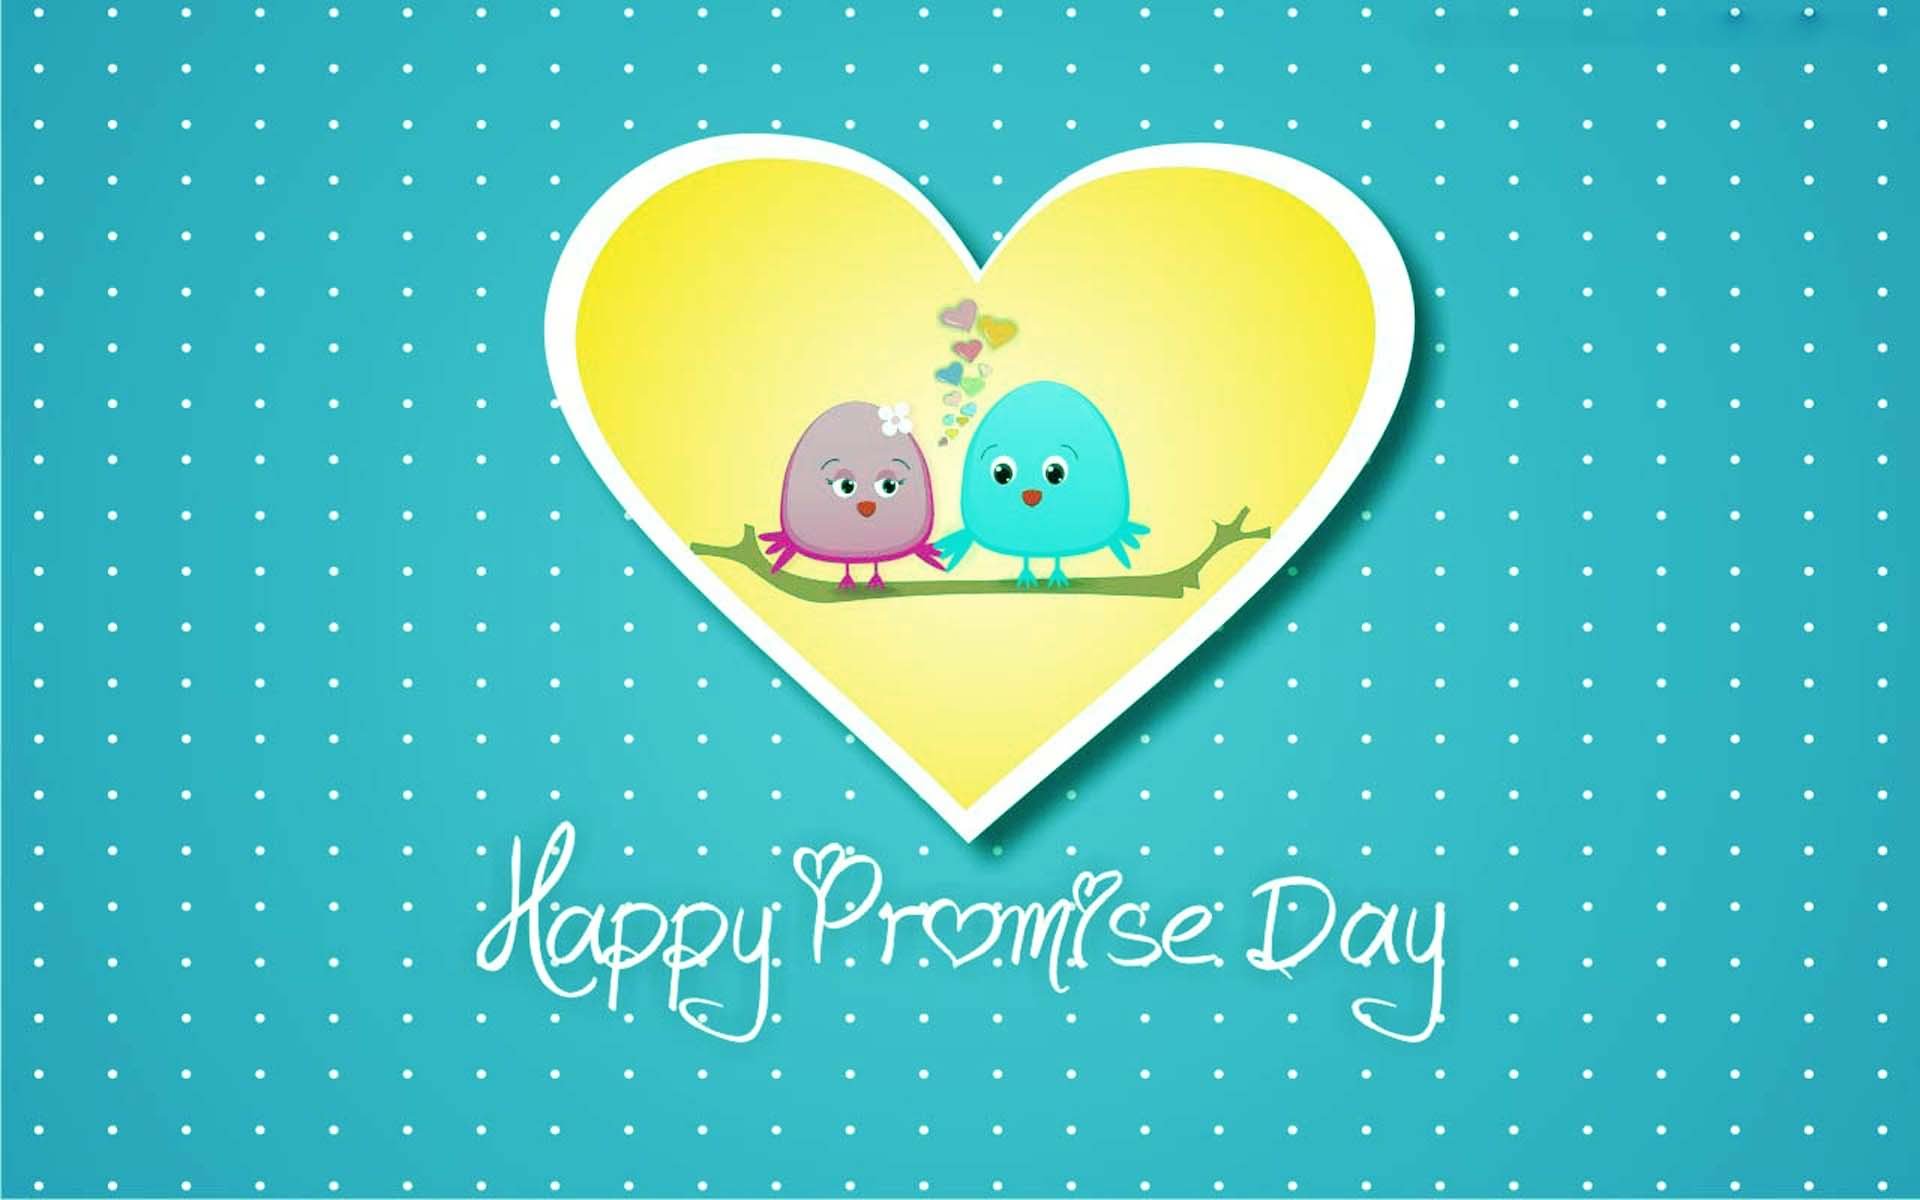 27 Wonderful Promise Day Wallpapers